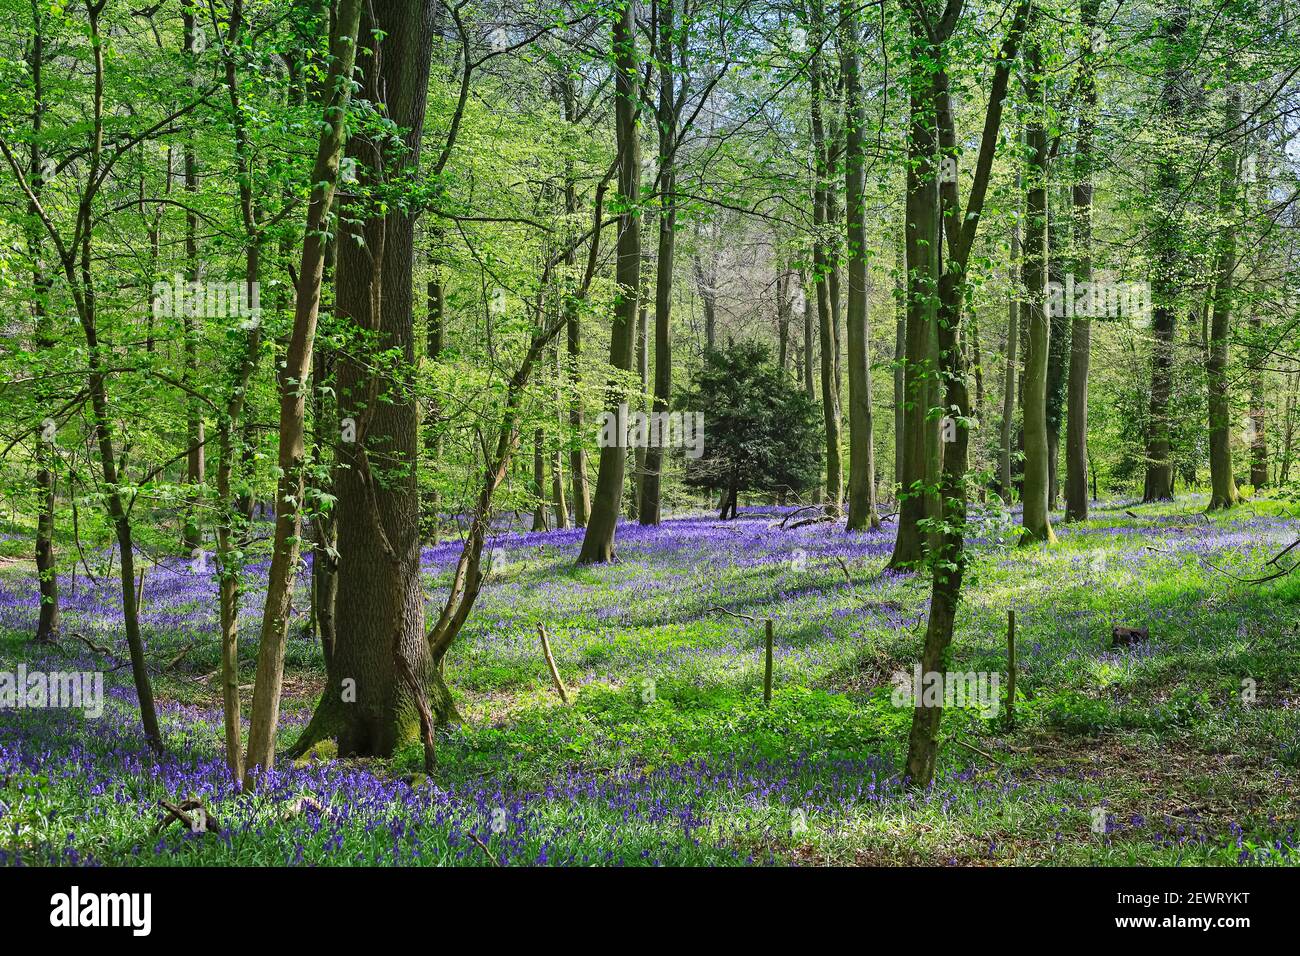 Bluebells in springtime in a classic beech tree setting at College Wood, Pishill in the Chiltern Hills, Pishill, Oxfordshire, England, United Kingdom Stock Photo